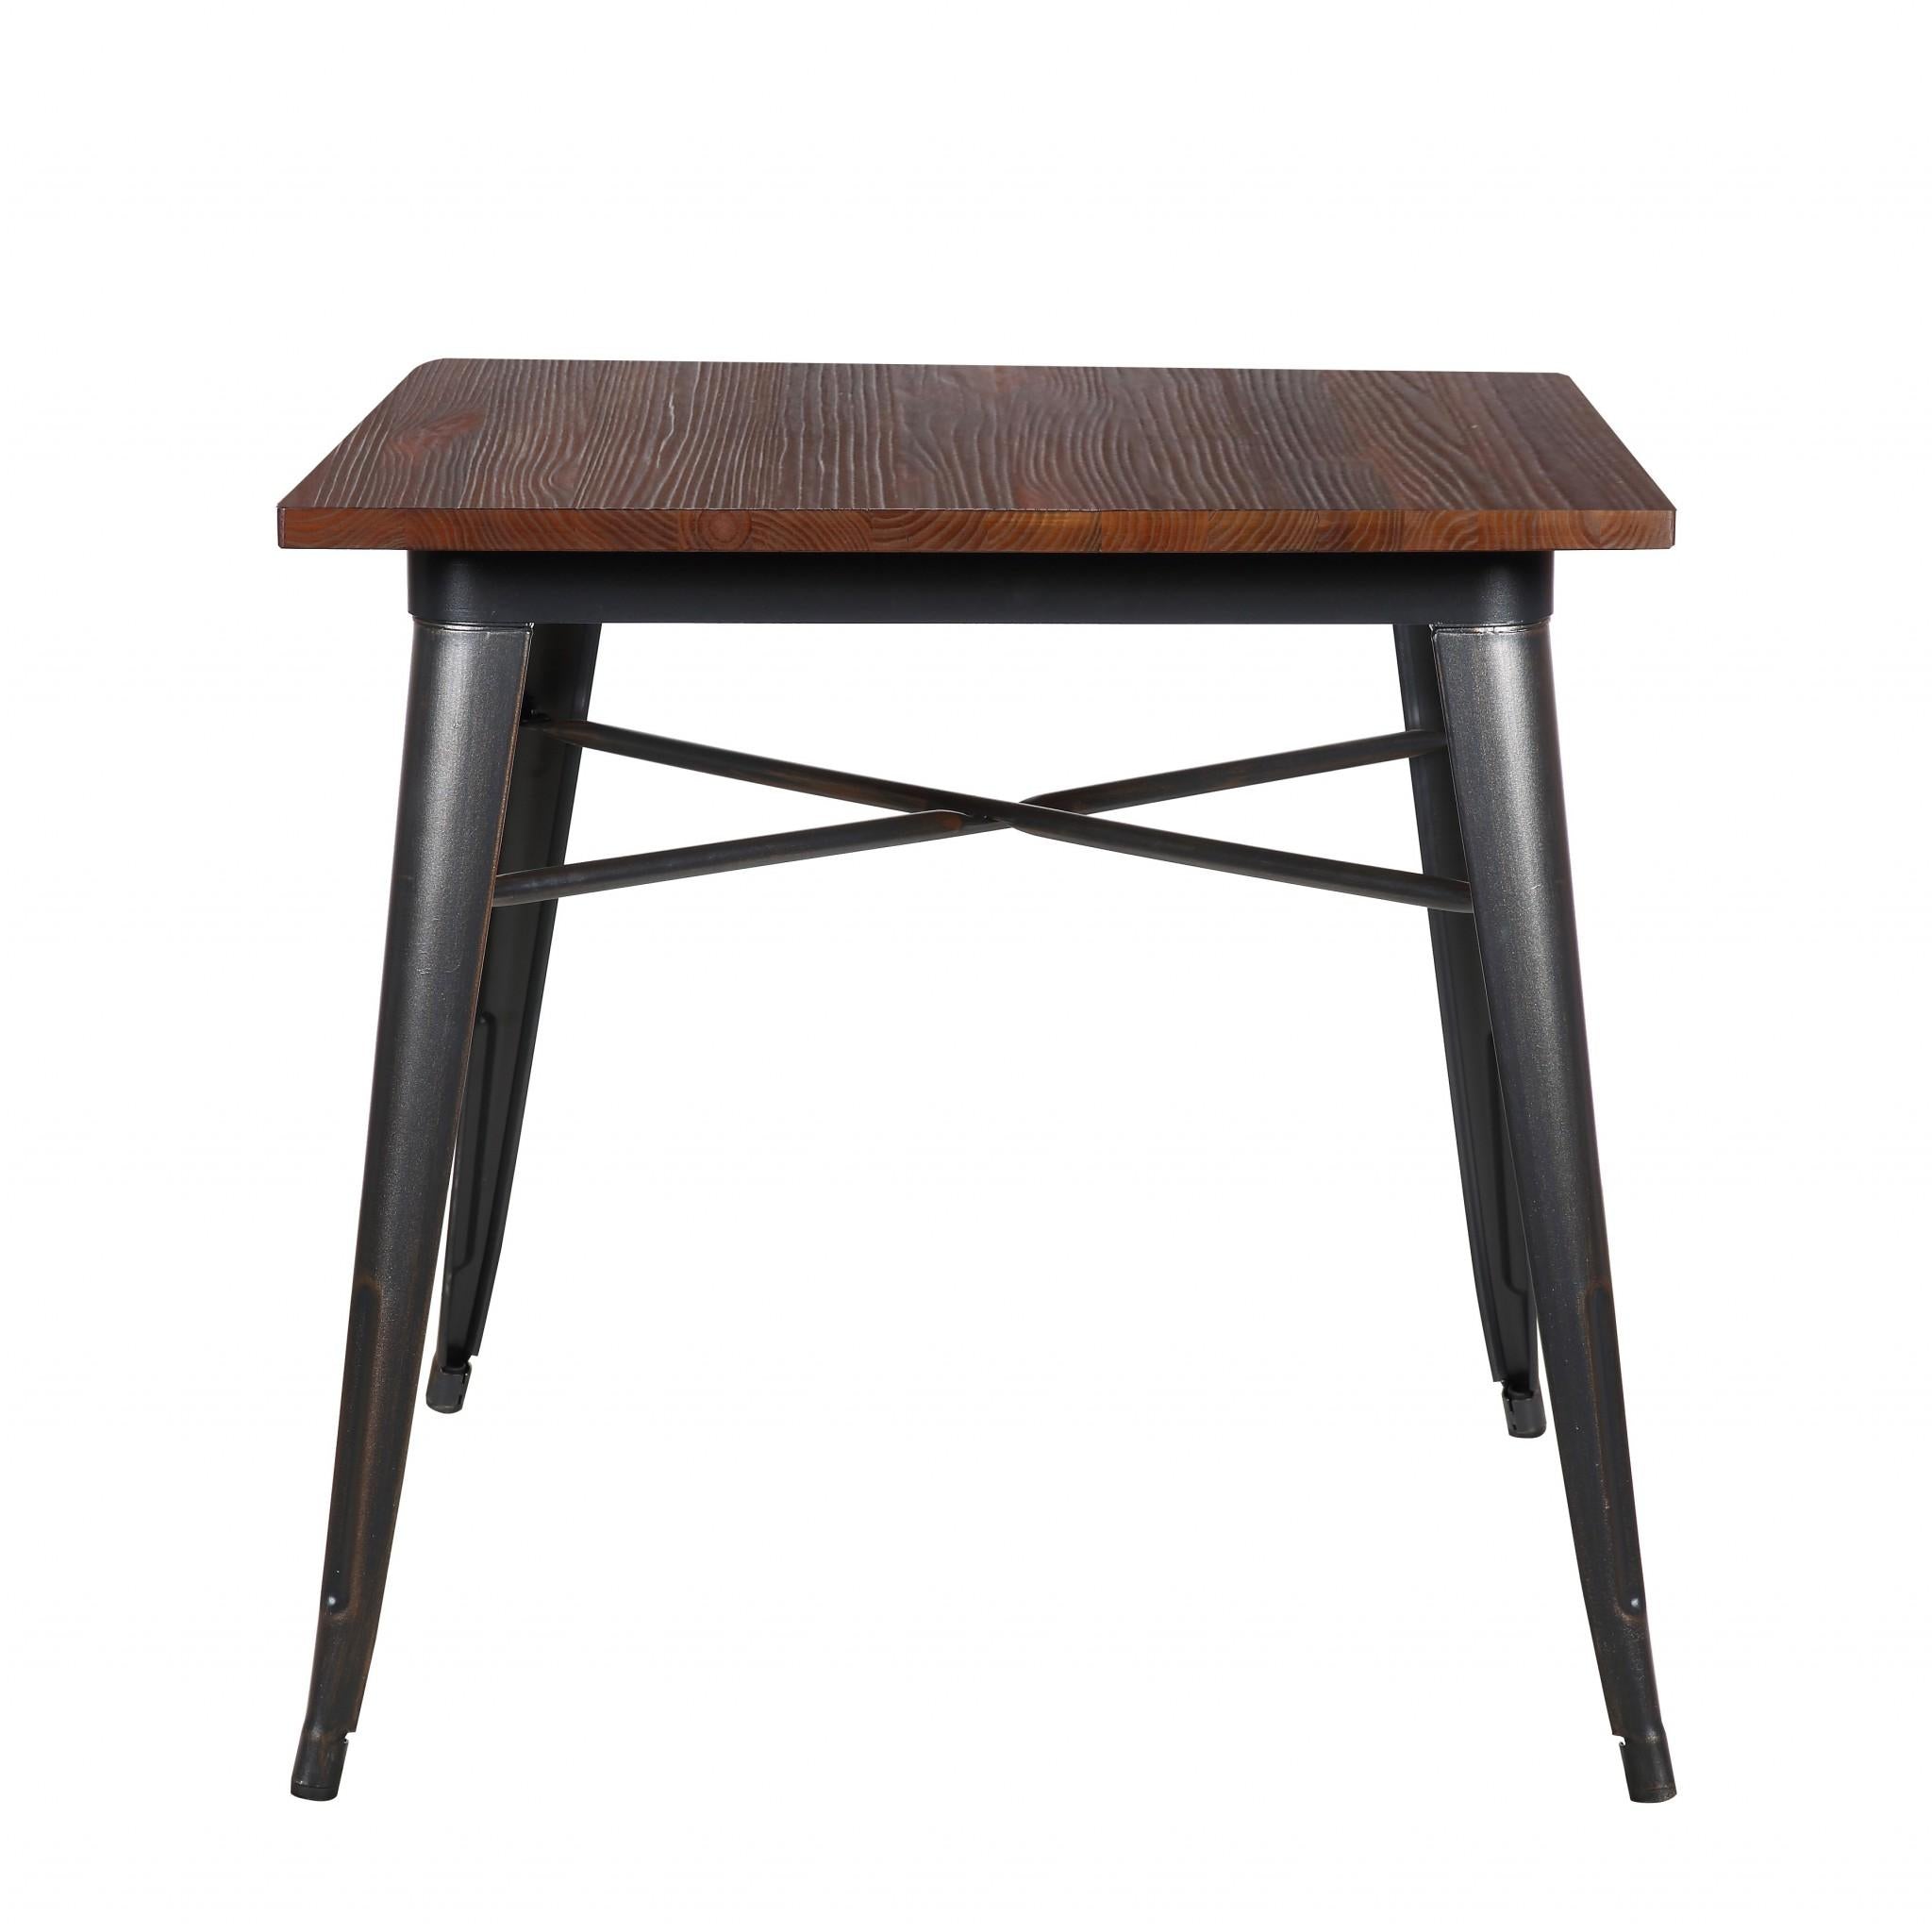 Mod Industrial Walnut and Black Square Dining Table